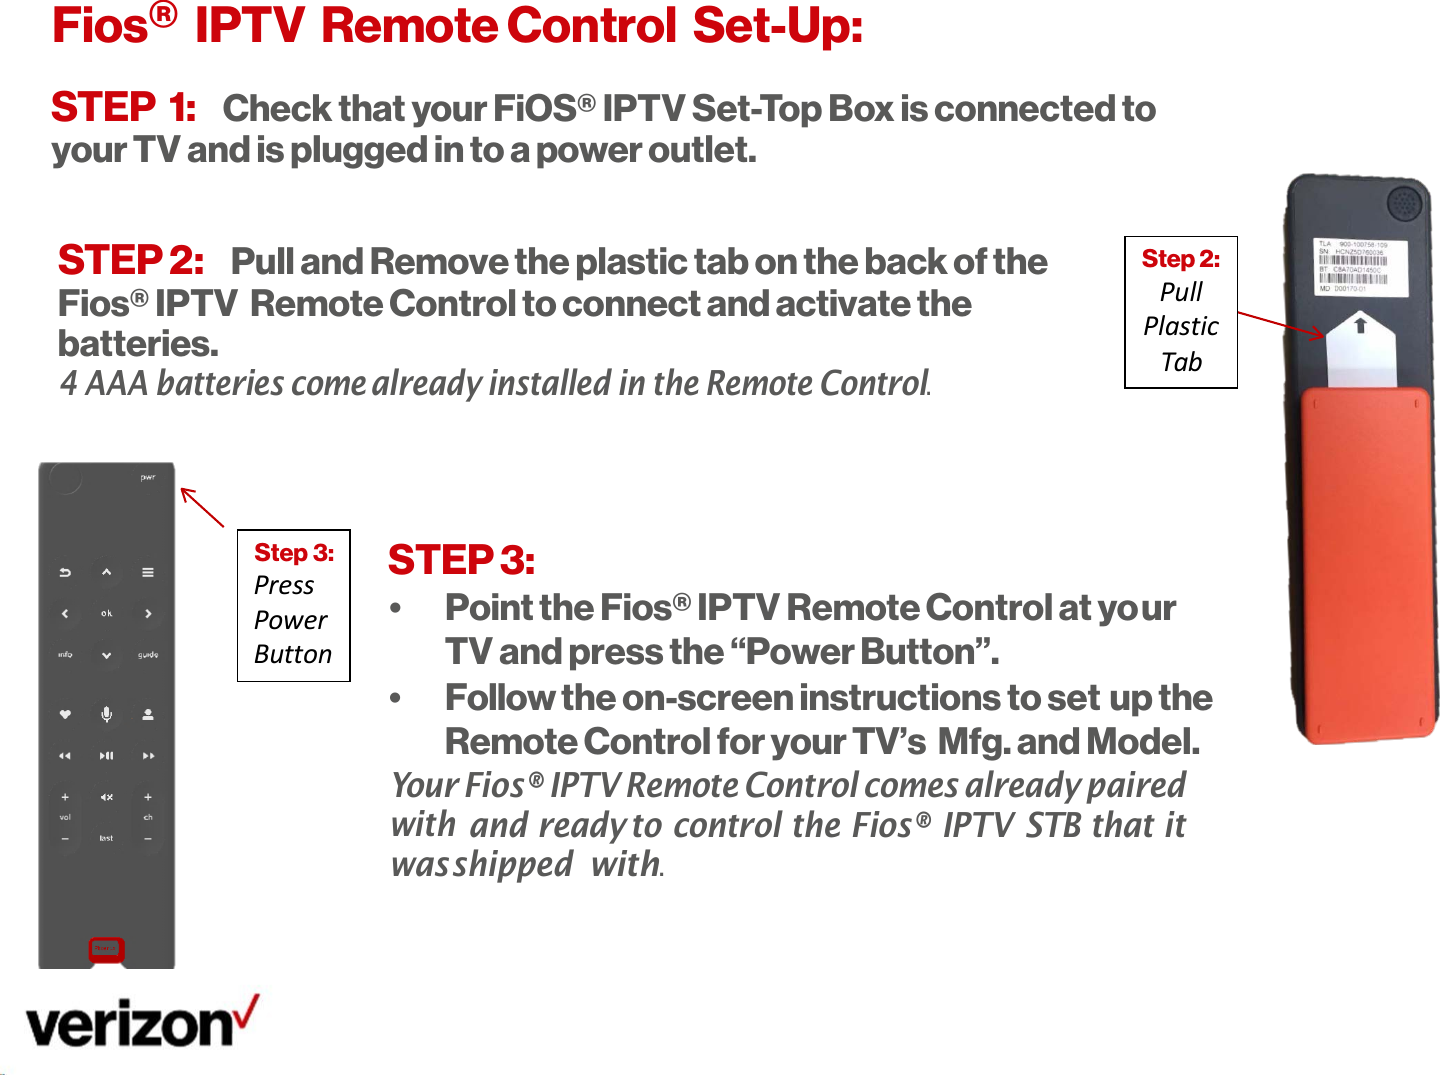   Step 2: Pull Plastic Tab ur up the    Step 3: Press Power Button Fios®  IPTV  Remote Control  Set-Up: STEP 1: Check that your FiOS® IPTV Set-Top Box is connected to your TV and is plugged in to a power outlet.   STEP 2: Pull and Remove the plastic tab on the back of the Fios® IPTV  Remote Control to connect and activate the batteries. 4 AAA batteries come already installed in the Remote Control.    STEP 3: •  Point the Fios® IPTV Remote Control at yo TV and press the “Power Button”. •  Follow the on-screen instructions to set Remote Control for your TV’s Mfg. and Model. Your Fios® IPTV Remote Control comes already paired with and ready to control the Fios® IPTV STB that it was shipped with. 